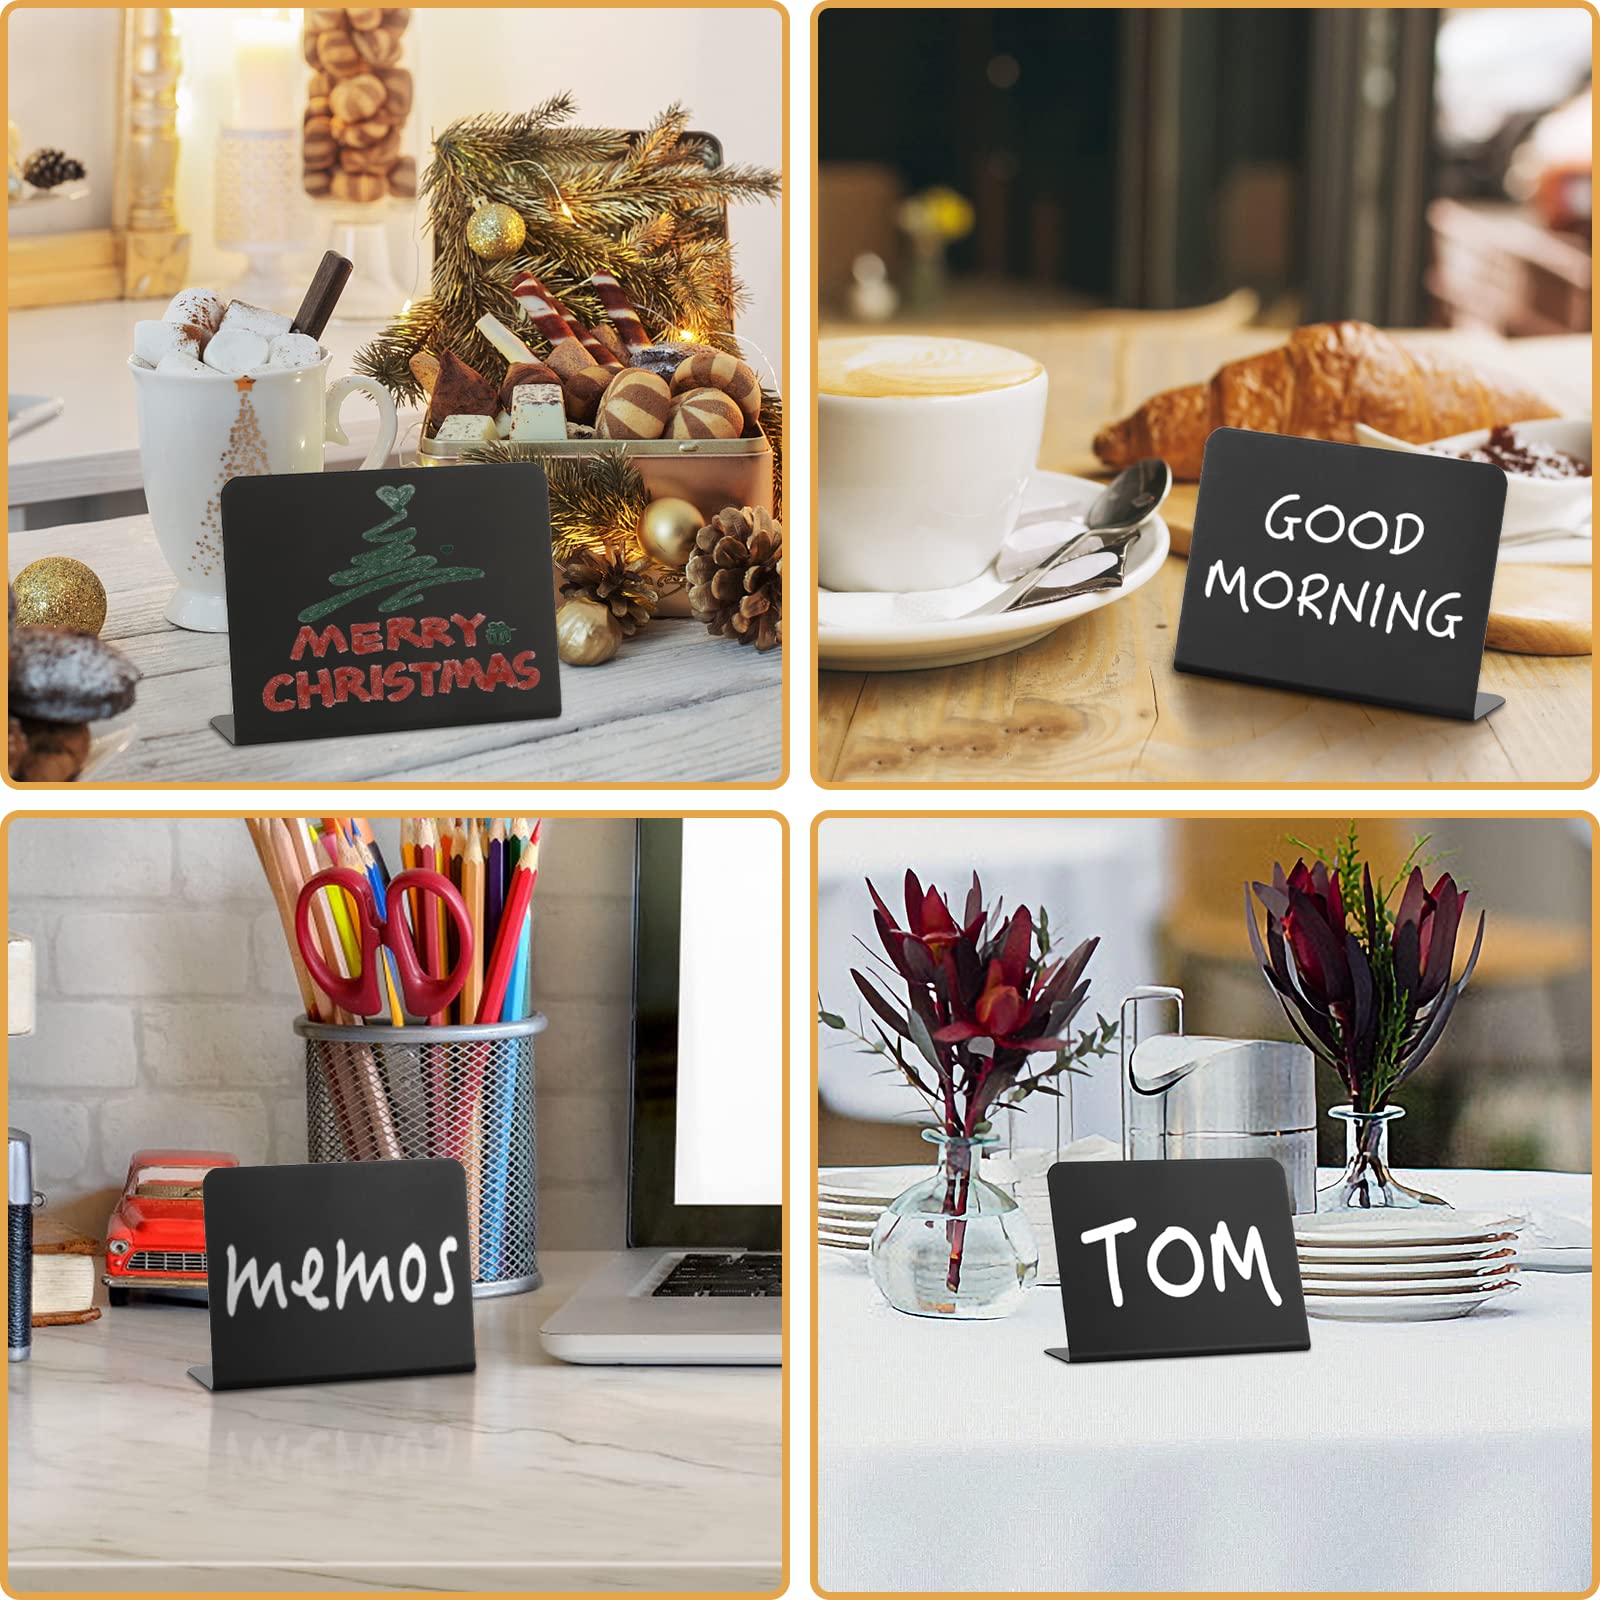 10 Pack Mini Chalkboard Signs, ALOTCHE Tabletop Chalkboard Labels L-Shaped Rustic Buffet Table Signs for Weddings, Birthday Parties, Message Board Signs, Bakery and Retail